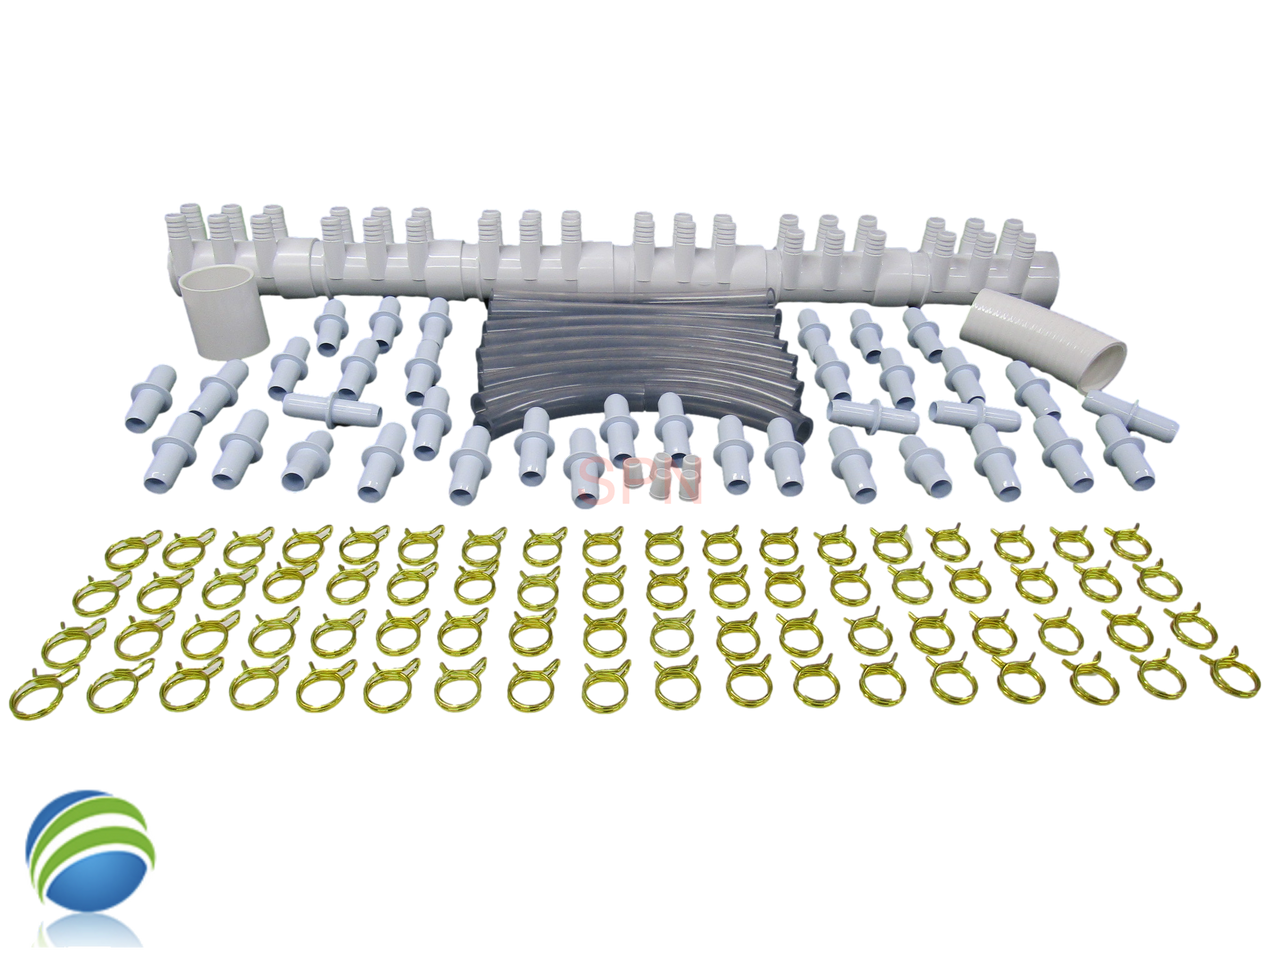 Manifold Hot Tub Spa Dead End (36) 3/4" Outlets with Coupler Kit Video How To